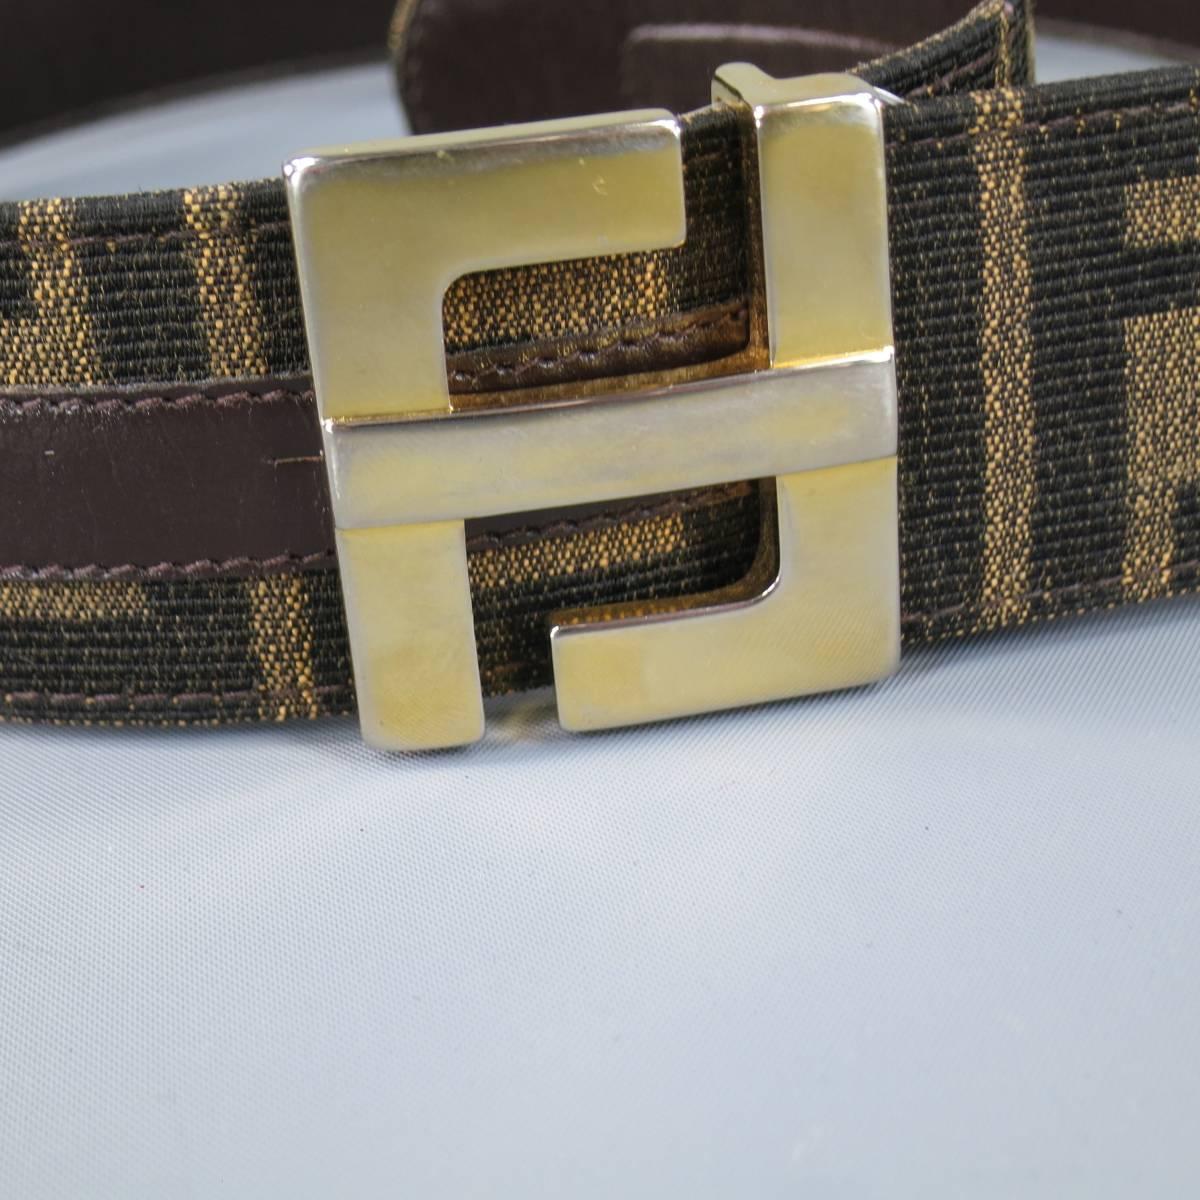 Vintage FENDI belt in signature leather lined monogram FF canvas with gold tone buckle. Minor wear and fading on buckle. Made in Italy.
 
Good Pre-Owned Condition.
Marked: 70/28
 
Length: 32 in.
Width: 1.75 in.
Fits: 24.5-28.5 in.
